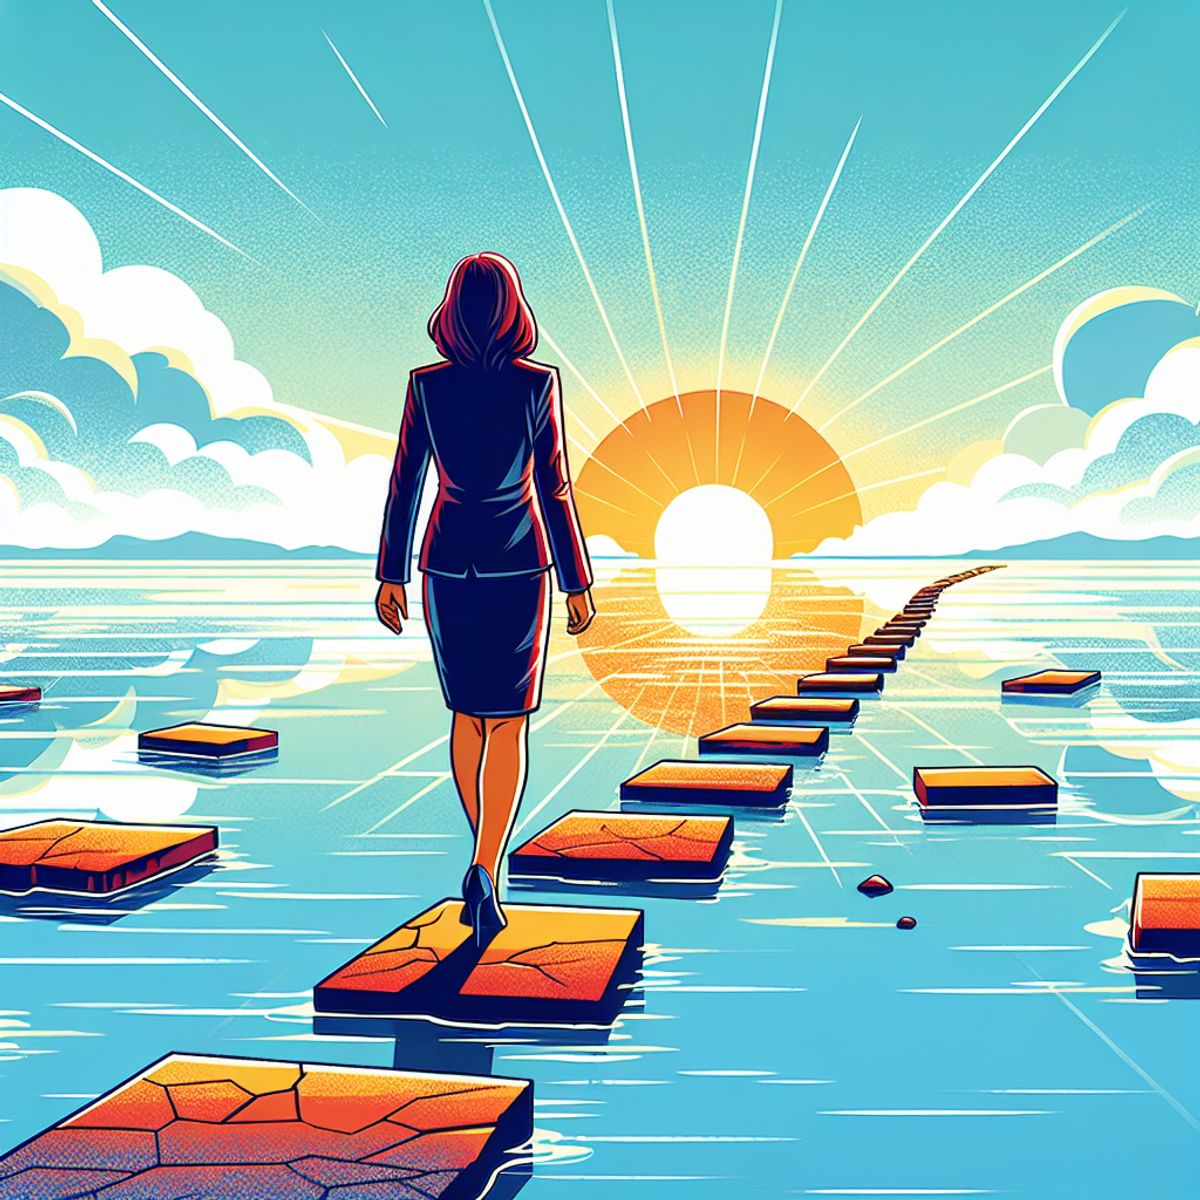 A South Asian woman confidently stepping onto a path made of stepping stones over water, with a rising sun and clear skies in the background.